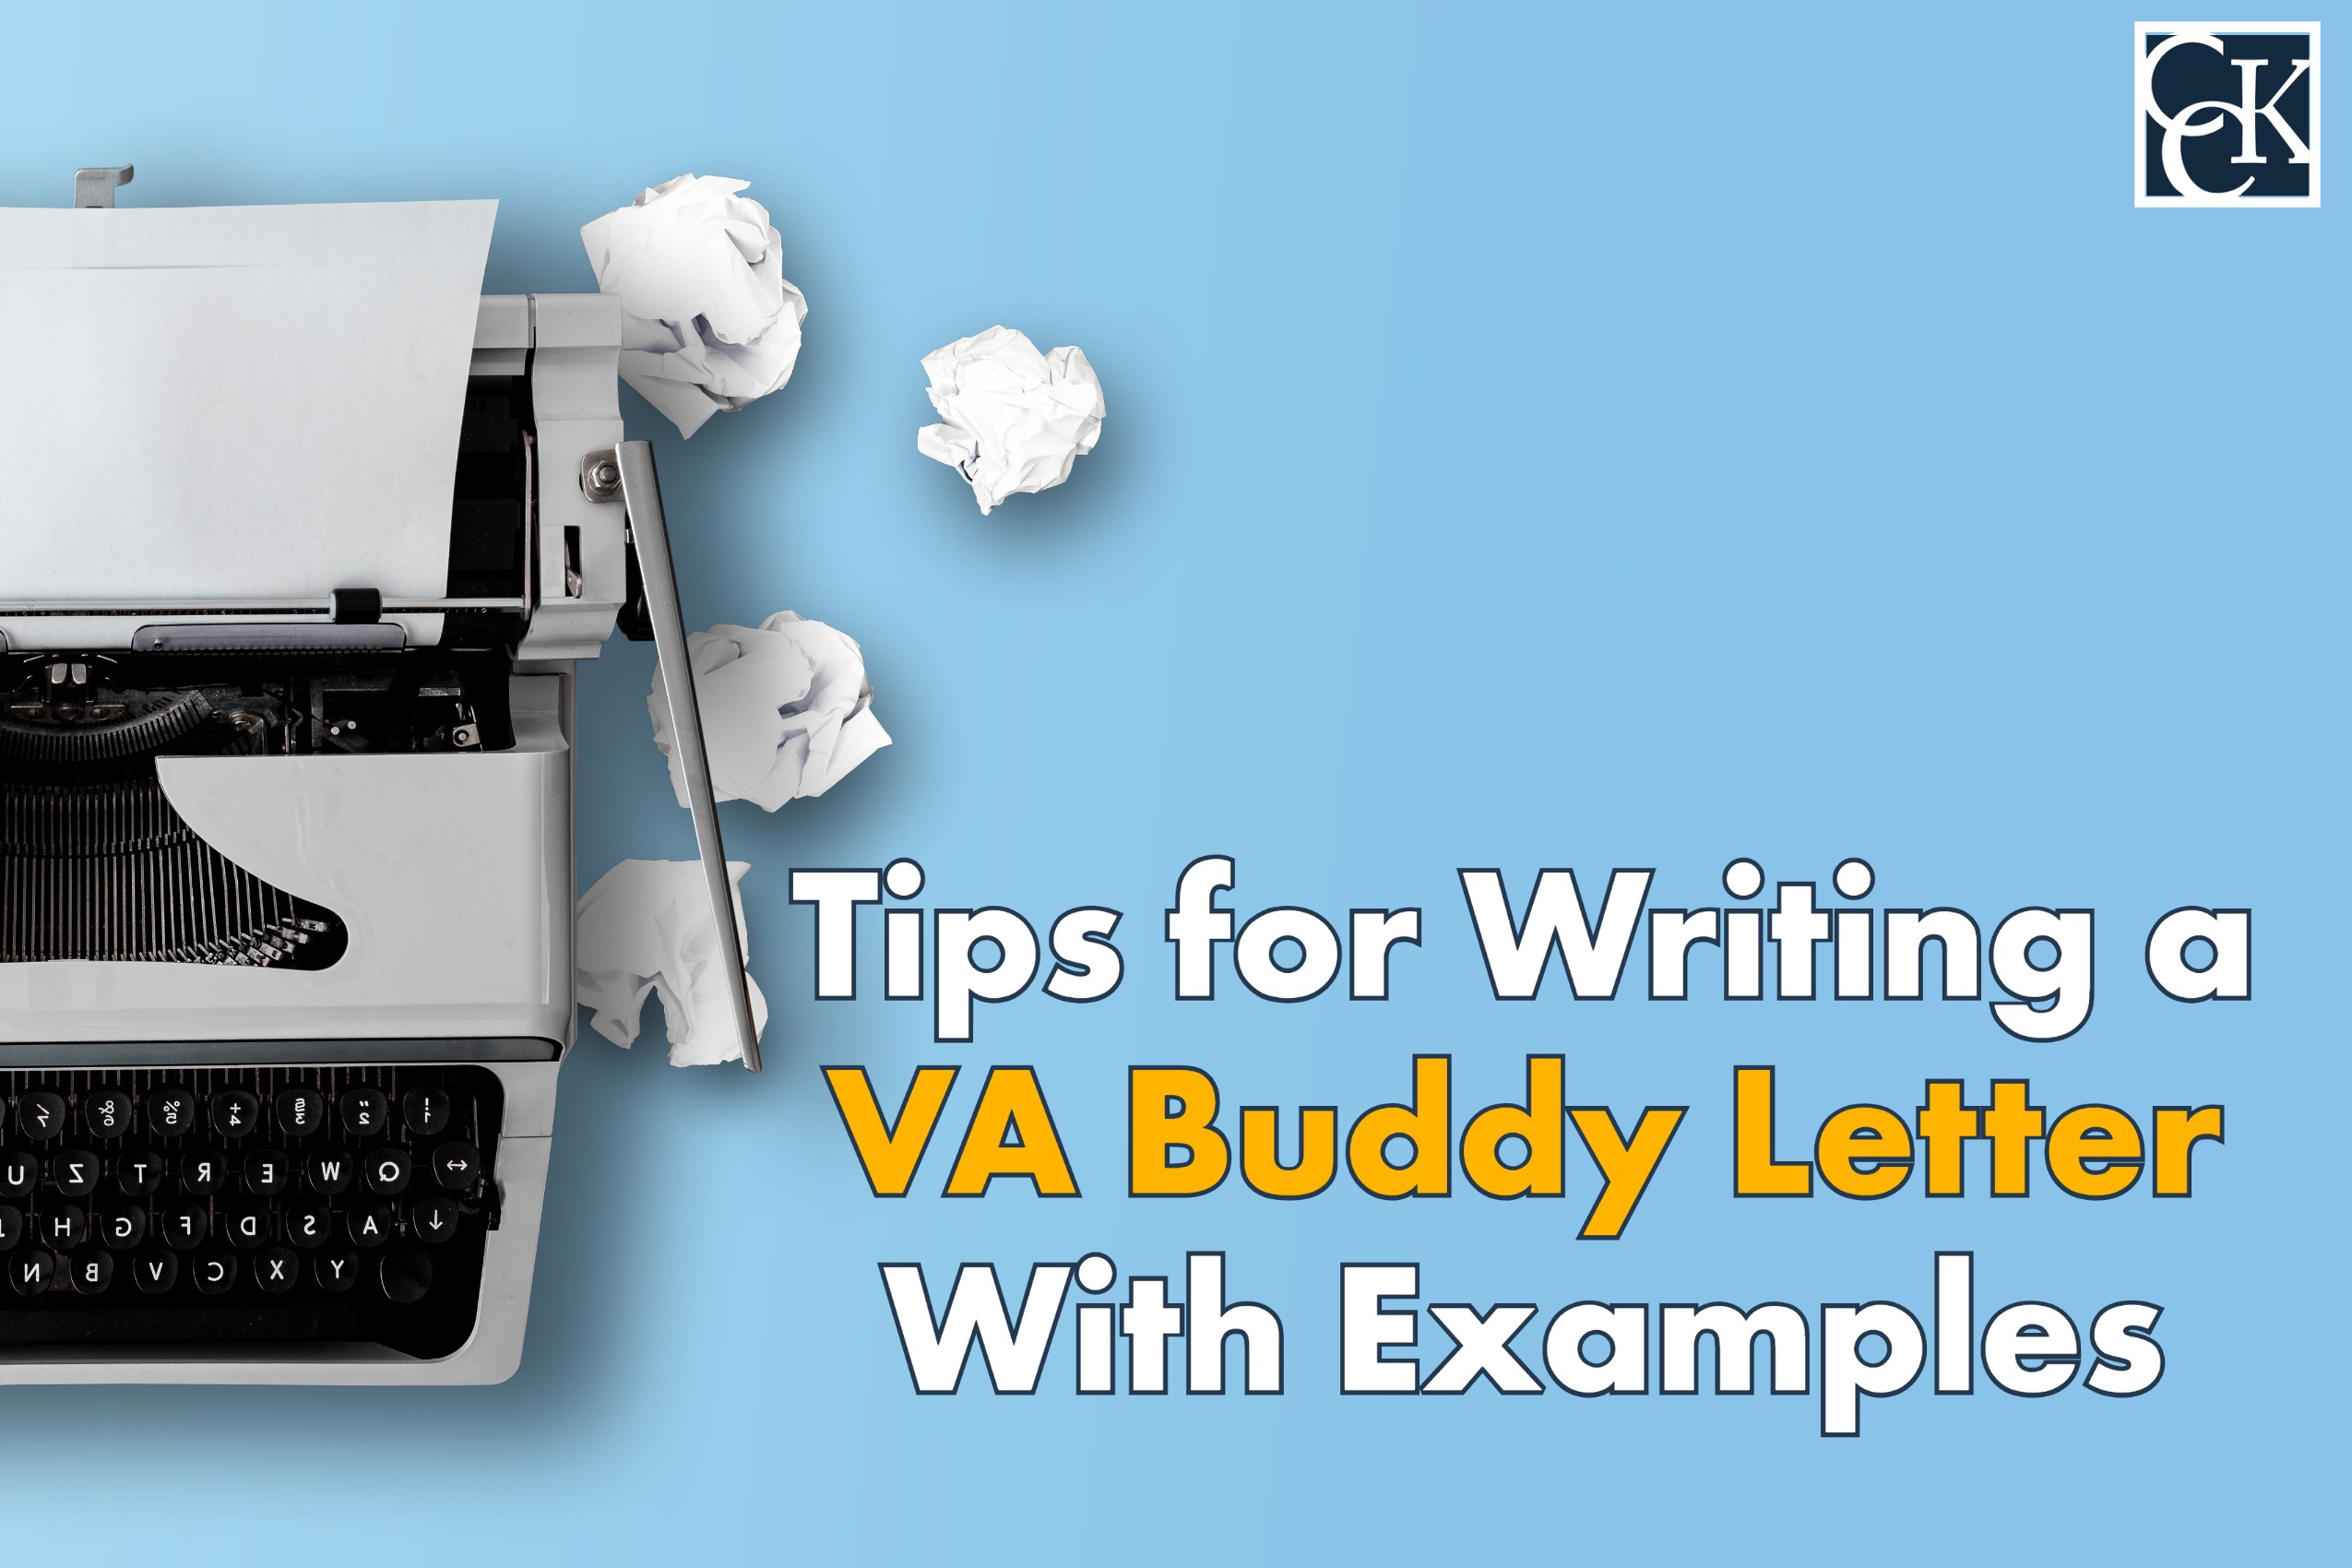 Tips for Writing a VA Buddy Letter With Examples | CCK Law